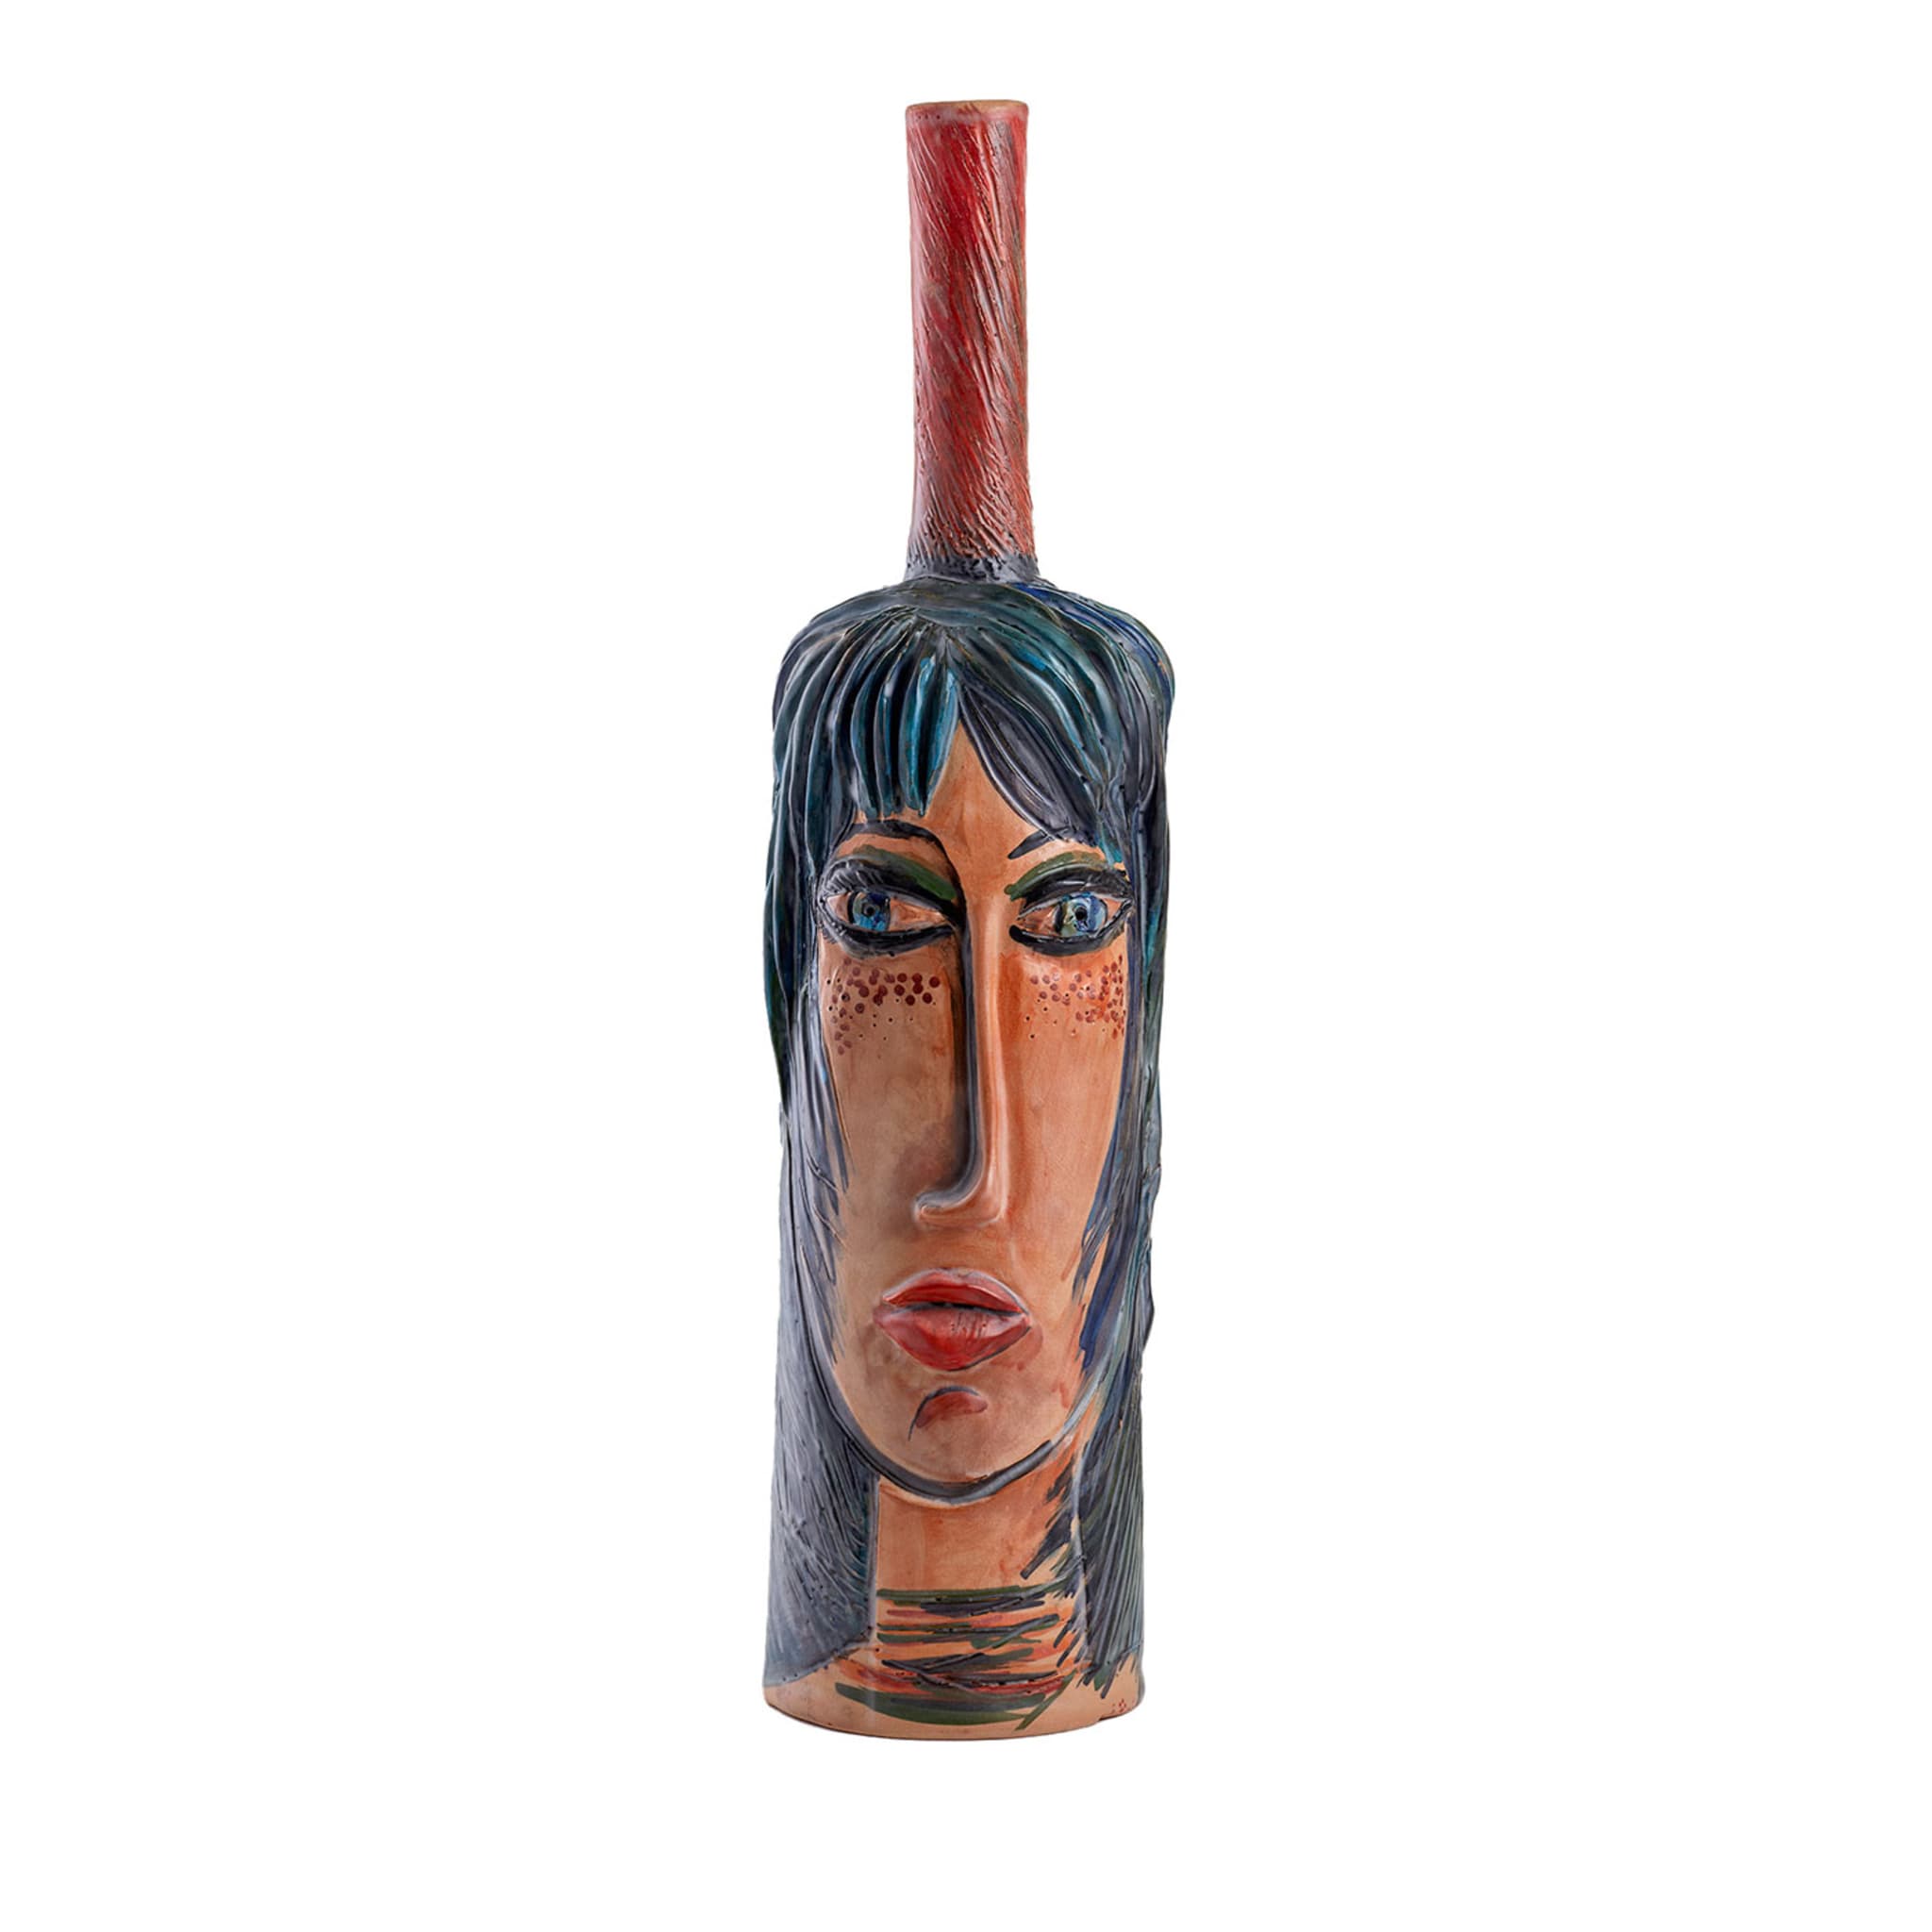 Anthropomorphic-Inspired H55 Polychrome Bottle/Sculpture #2 - Main view